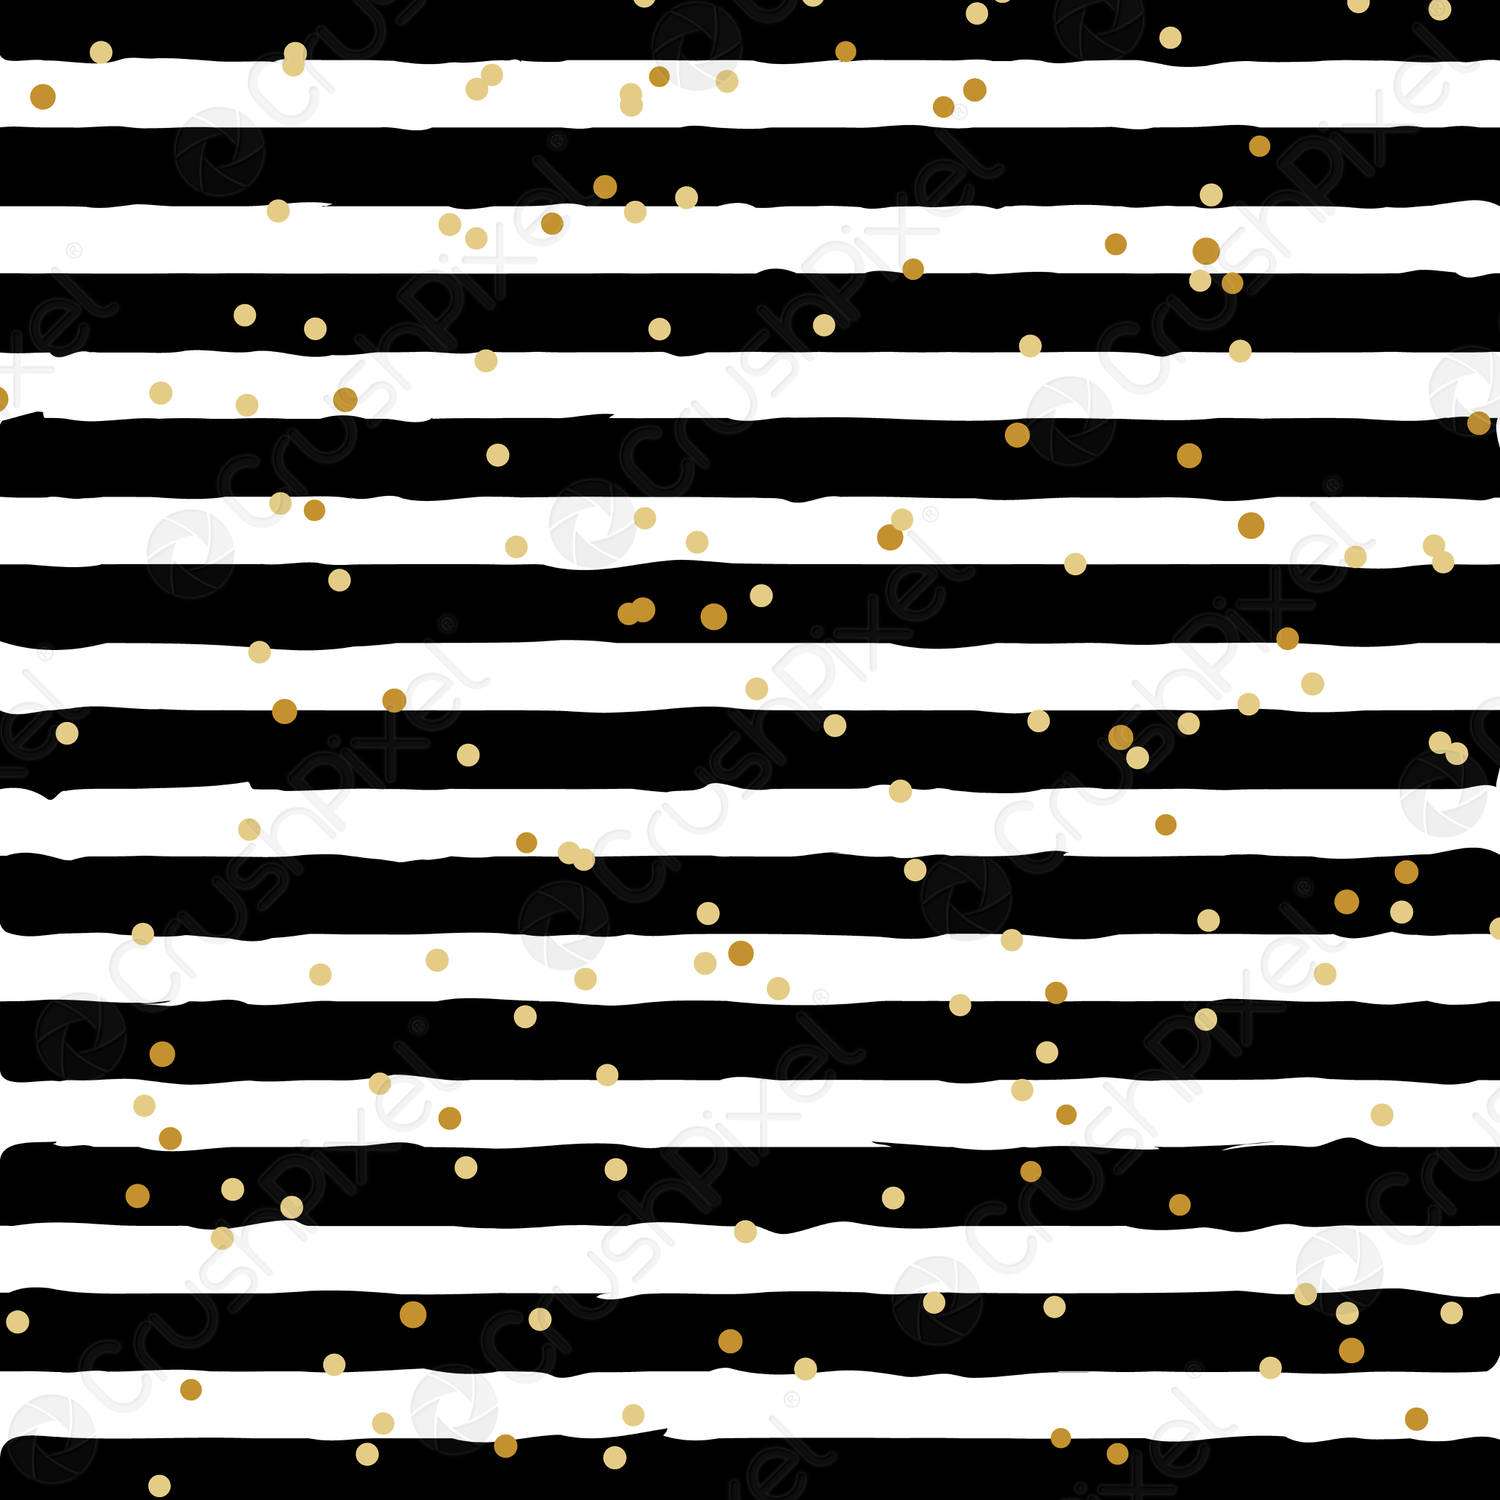 Abstract black and white striped on trendy background with random